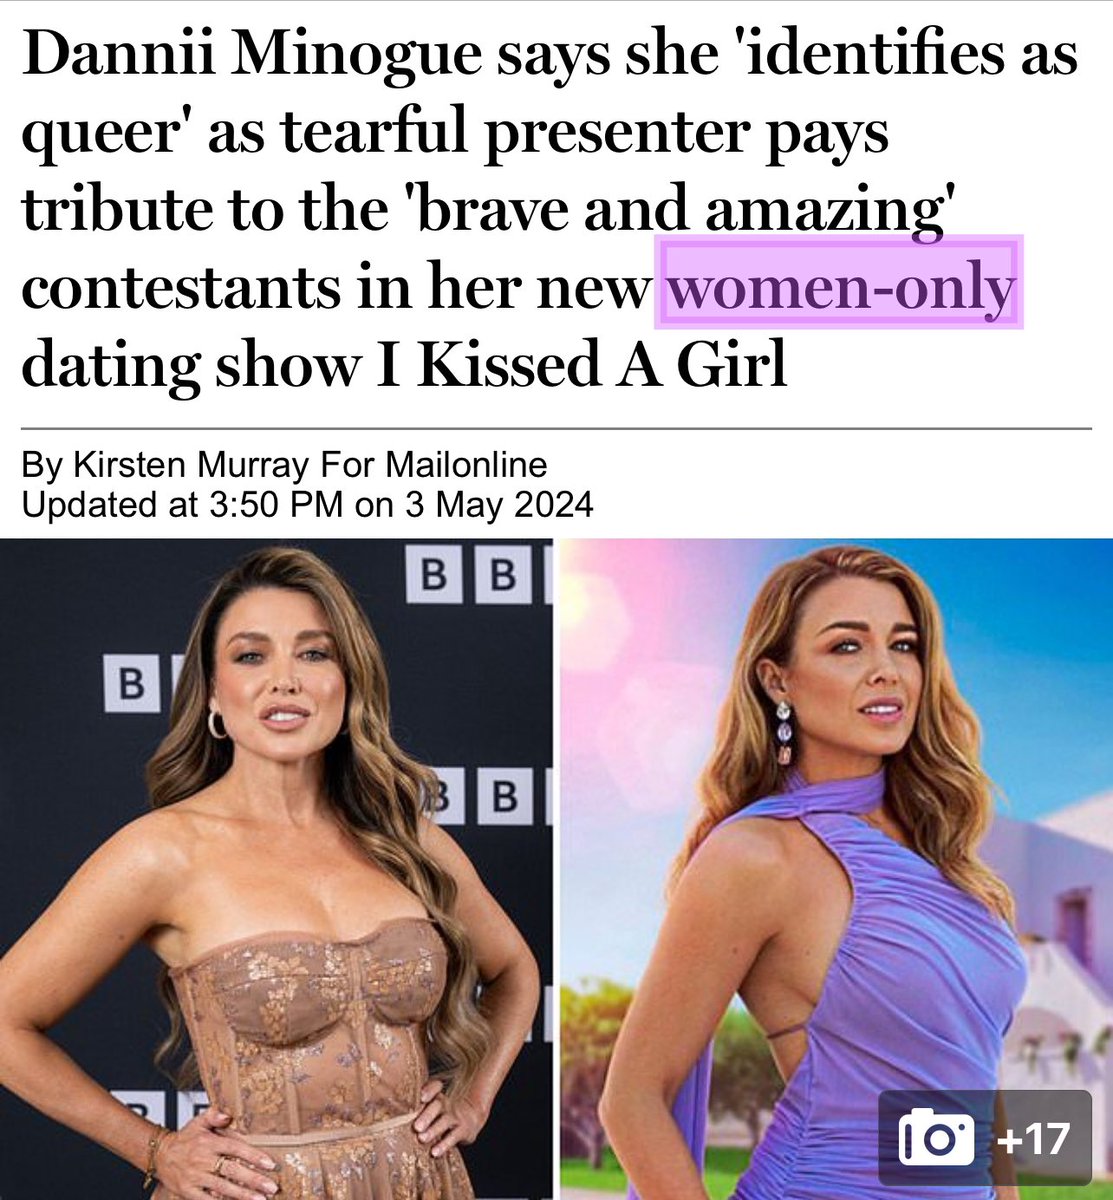 Either lesbians are about to be gaslit on international television by heterosexual men claiming to be women, or suddenly everyone knows what a woman & a lesbian is again because ratings. 🤷‍♀️